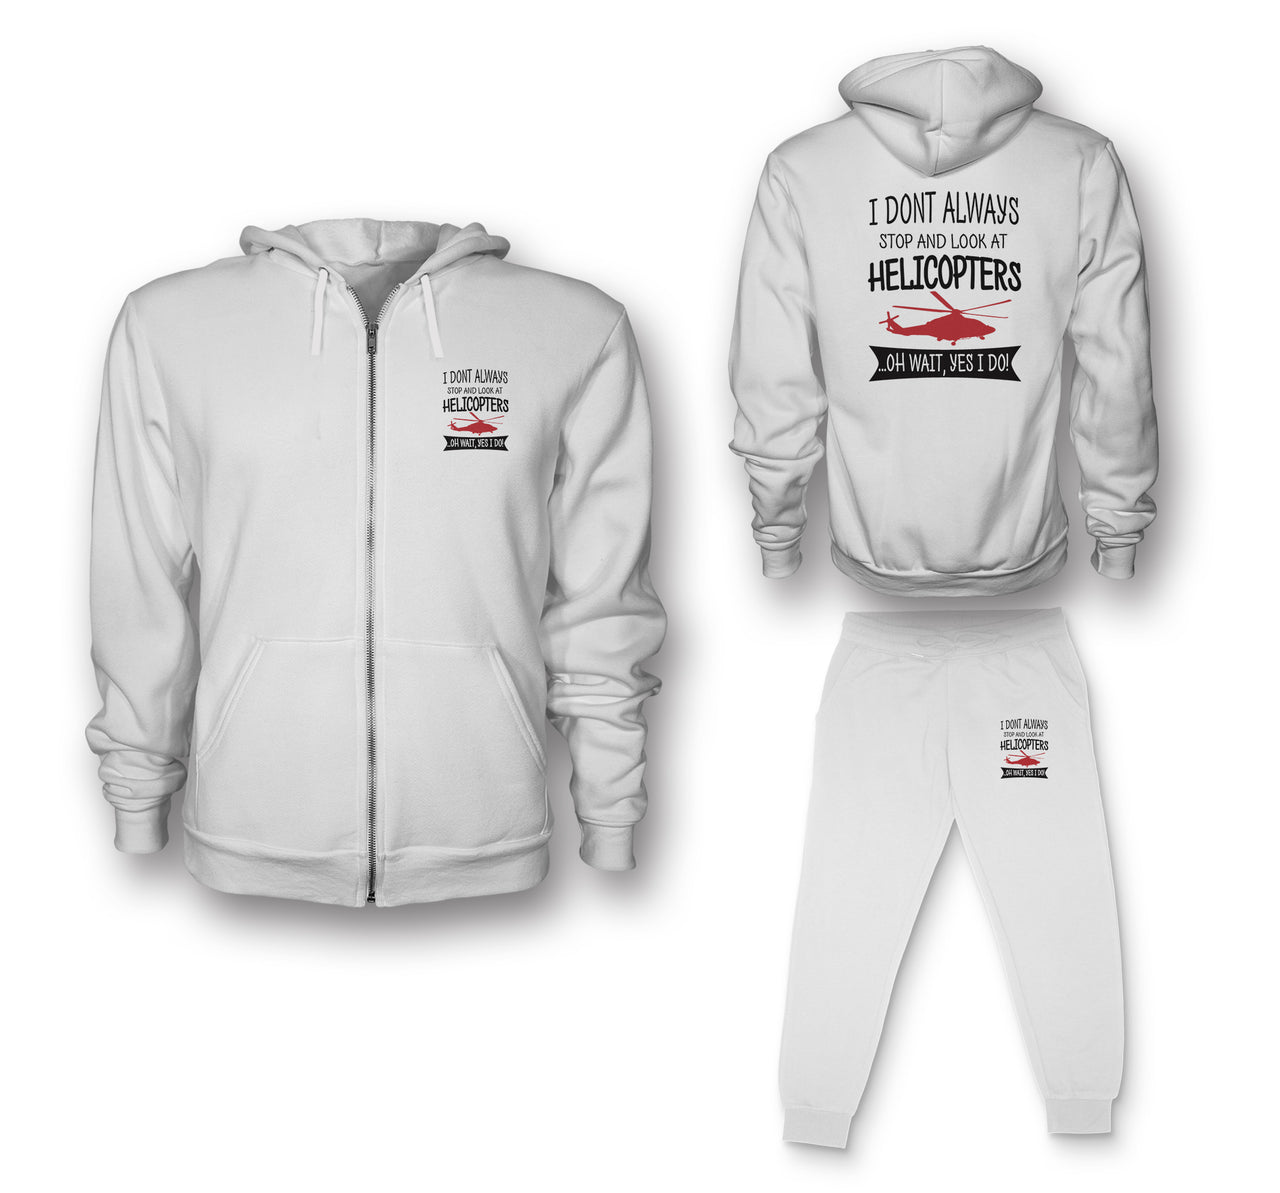 I Don't Always Stop and Look at Helicopters Designed Zipped Hoodies & Sweatpants Set